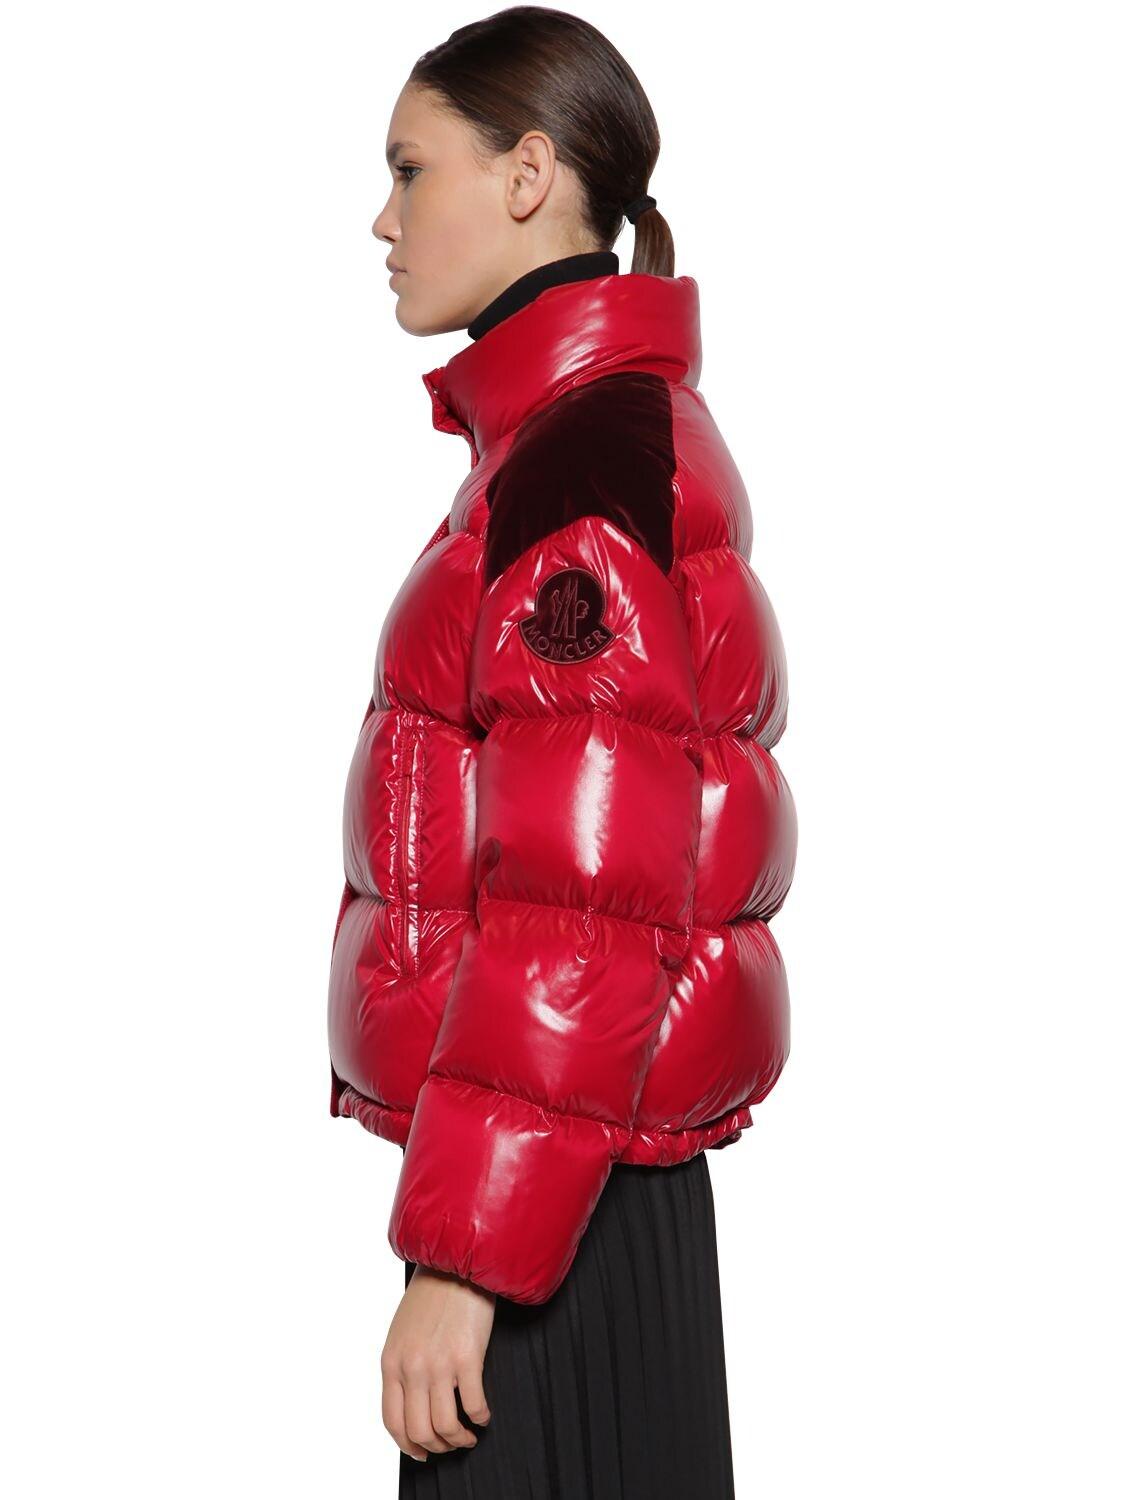 moncler chouette red